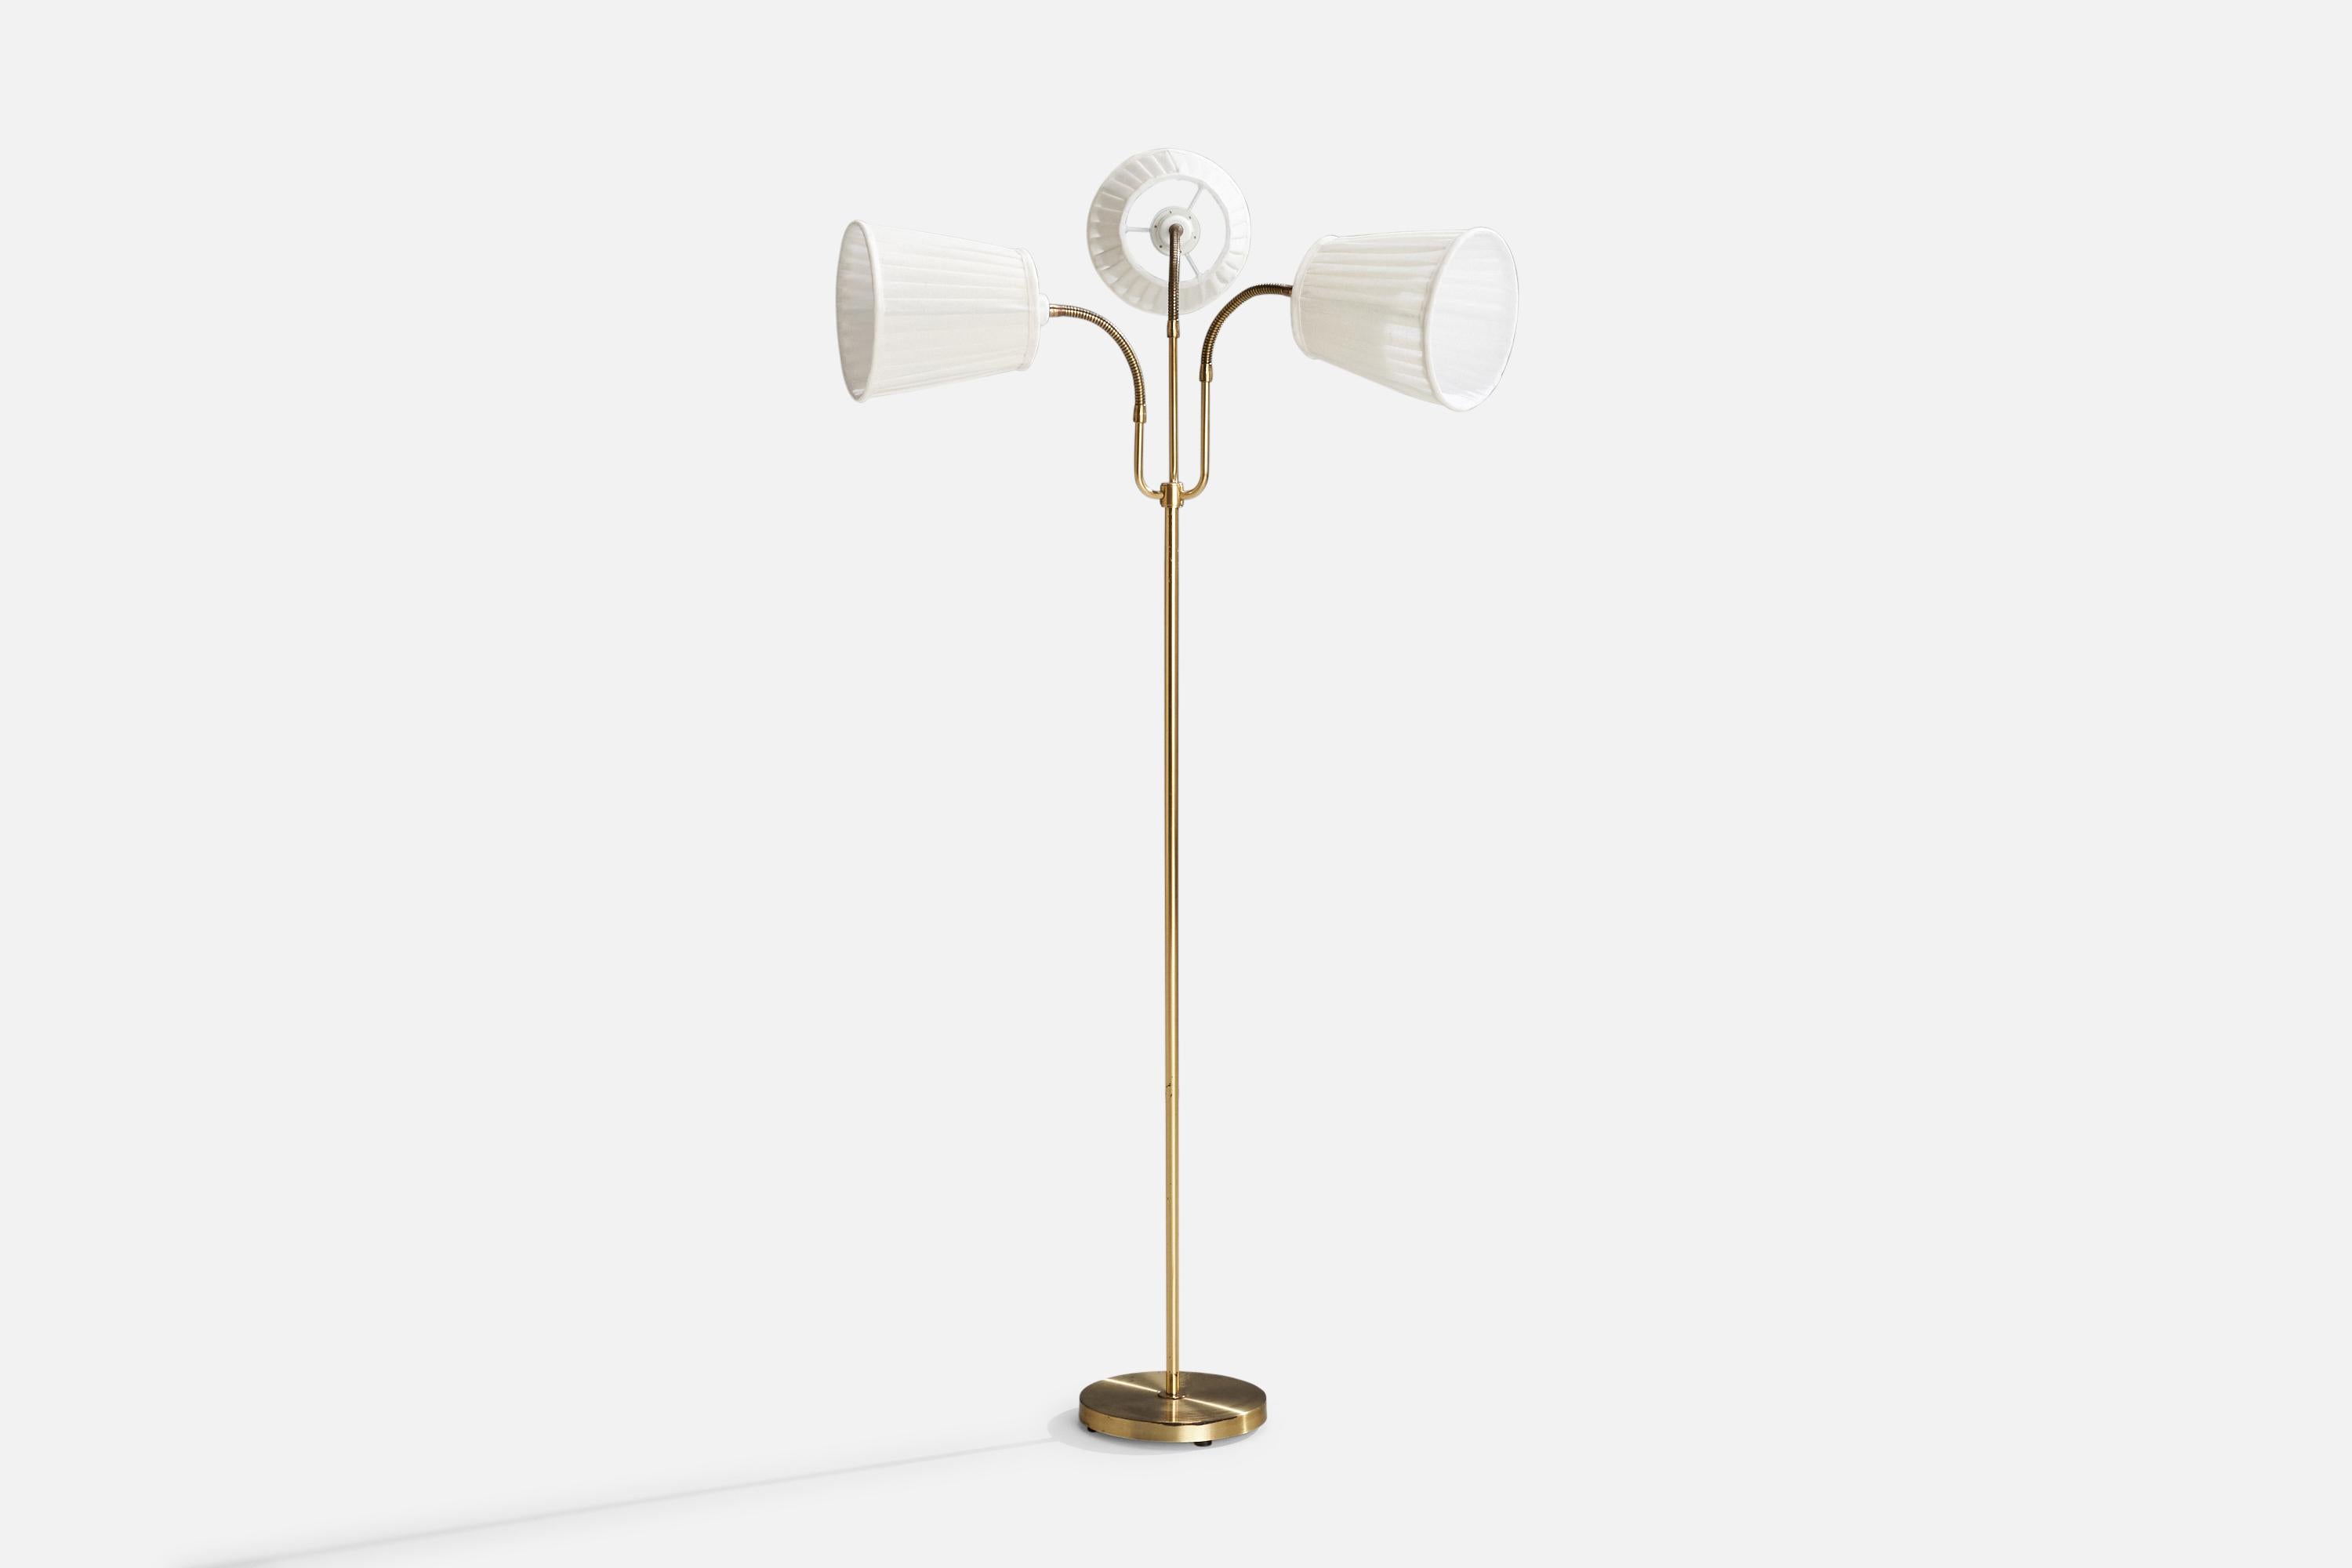 A brass and off-white fabric floor lamp designed and produced in Sweden, c. 1950s.

Dimensions Variable
Heavy oxidation present.
Overall Dimensions (inches): 55” H x 32” W x 21.875” D
Stated dimensions include shade.
Bulb Specifications: E-26